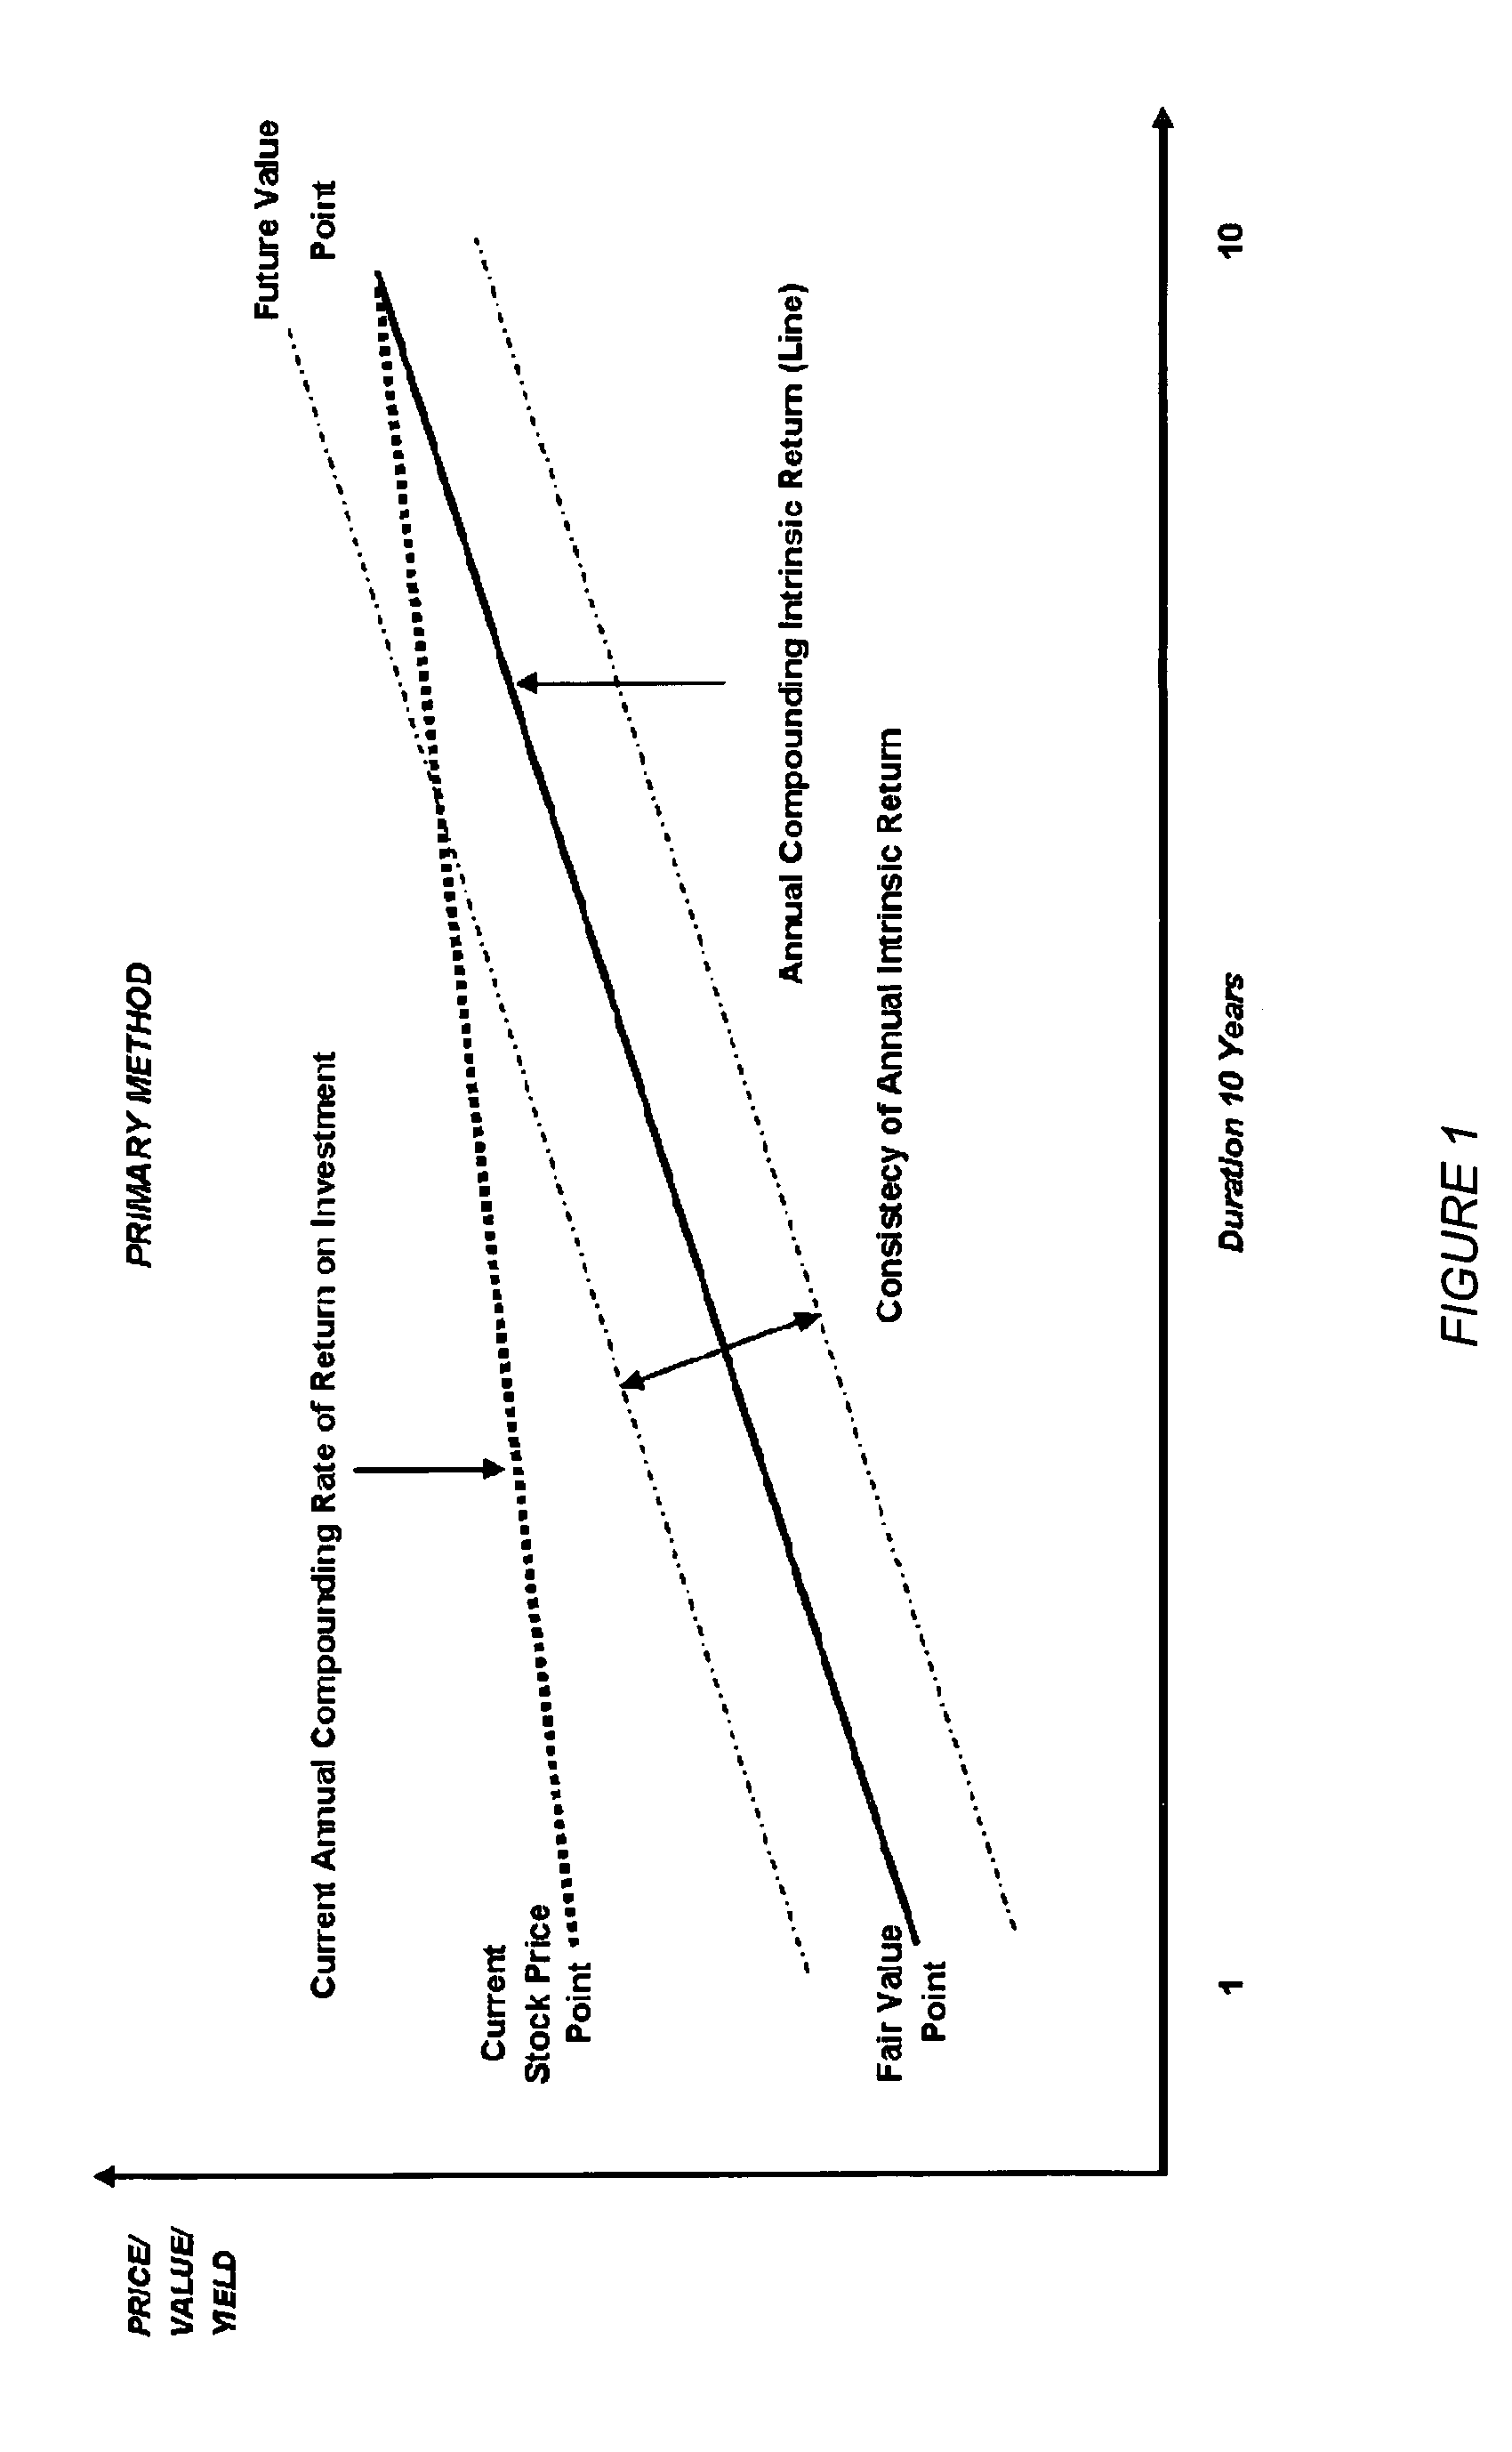 System and method for determining profitability of stock investments